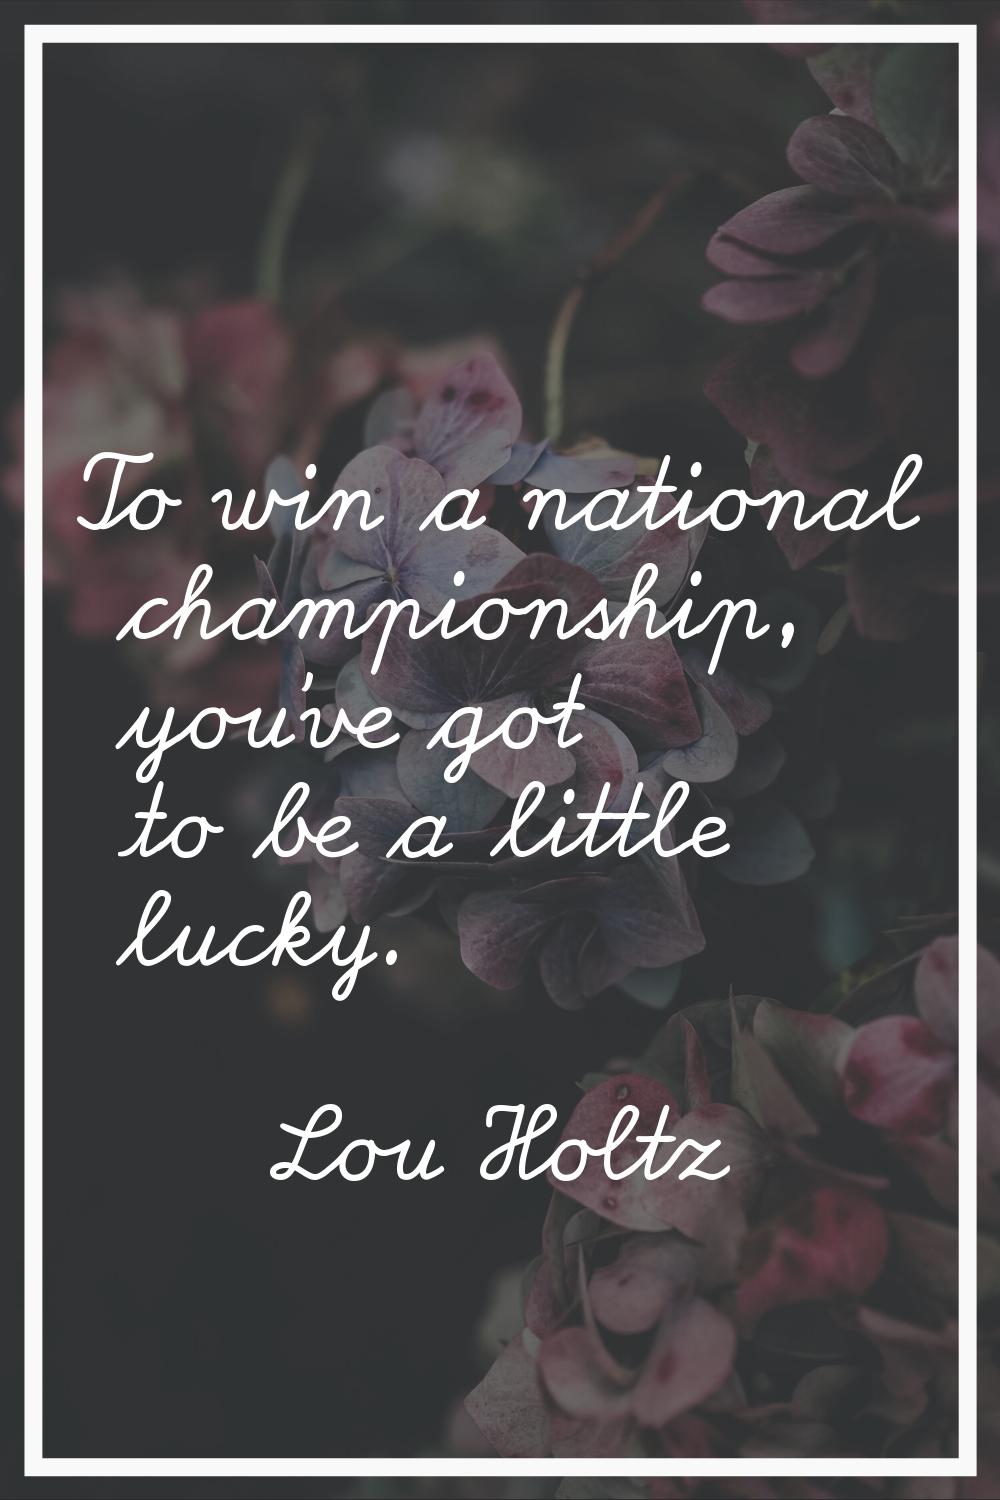 To win a national championship, you've got to be a little lucky.